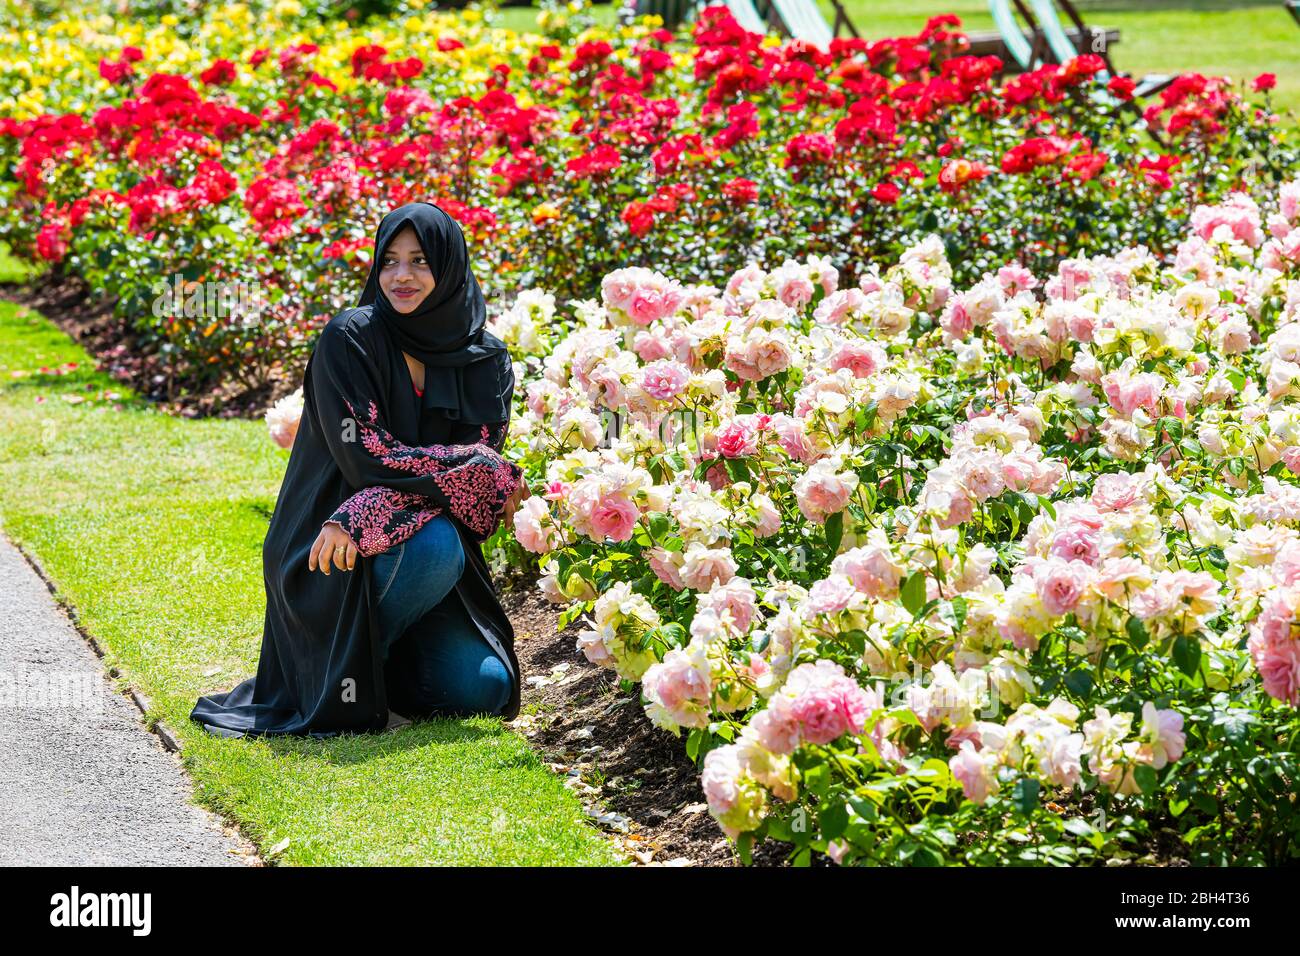 London, UK - June 24, 2018: Queen Mary's Rose Gardens in Regent's park during sunny summer day with woman person people in hijab sitting by colorful r Stock Photo